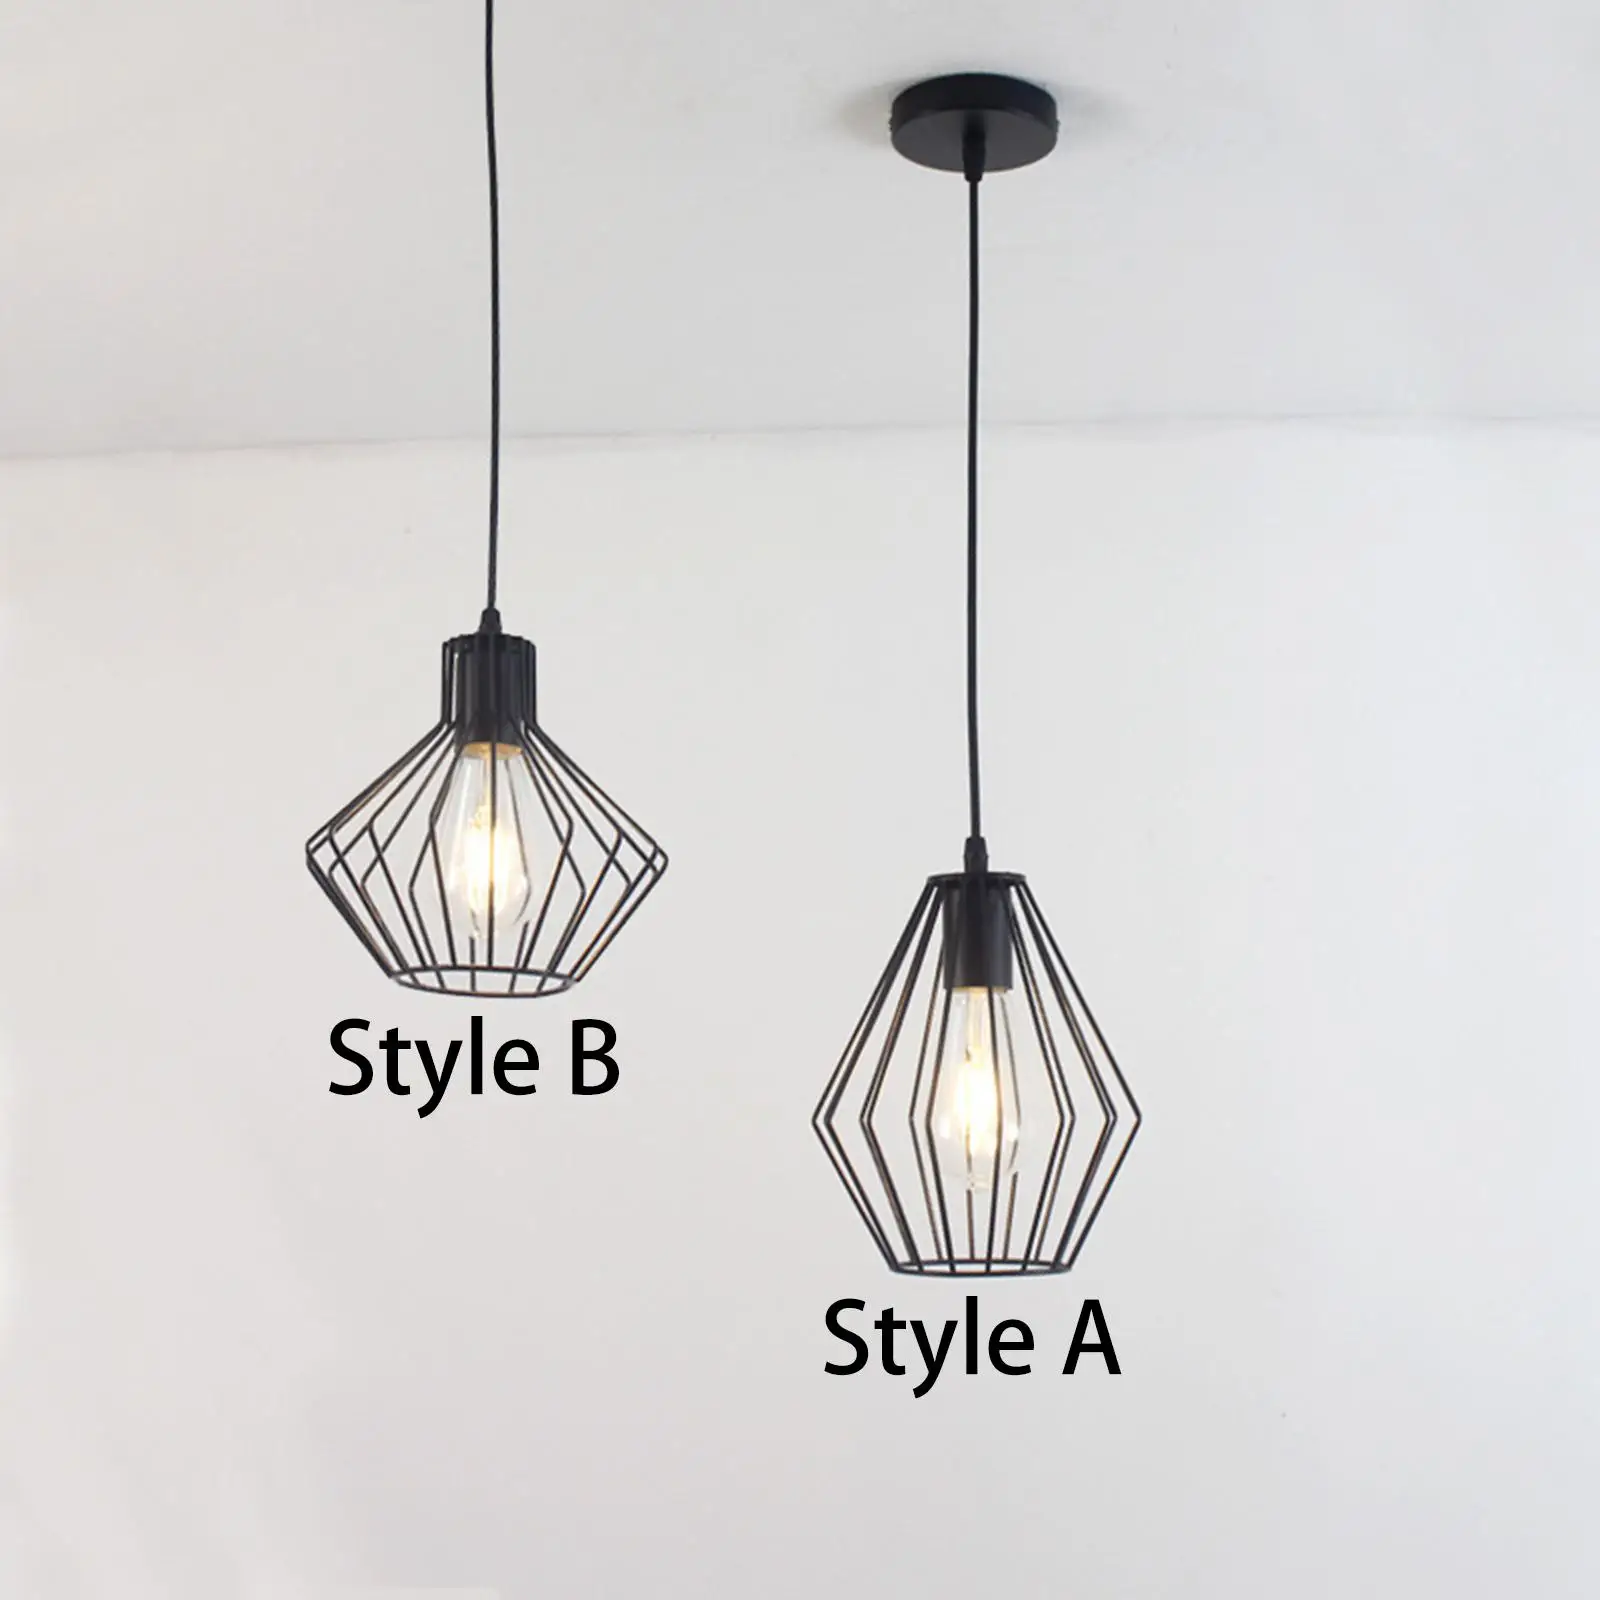 Black Pendant Light Shade Ceiling Lamps Lighting Fixture Lighting Metal Cage Lampshade for Dining Room Closet Bar Entryway Decor